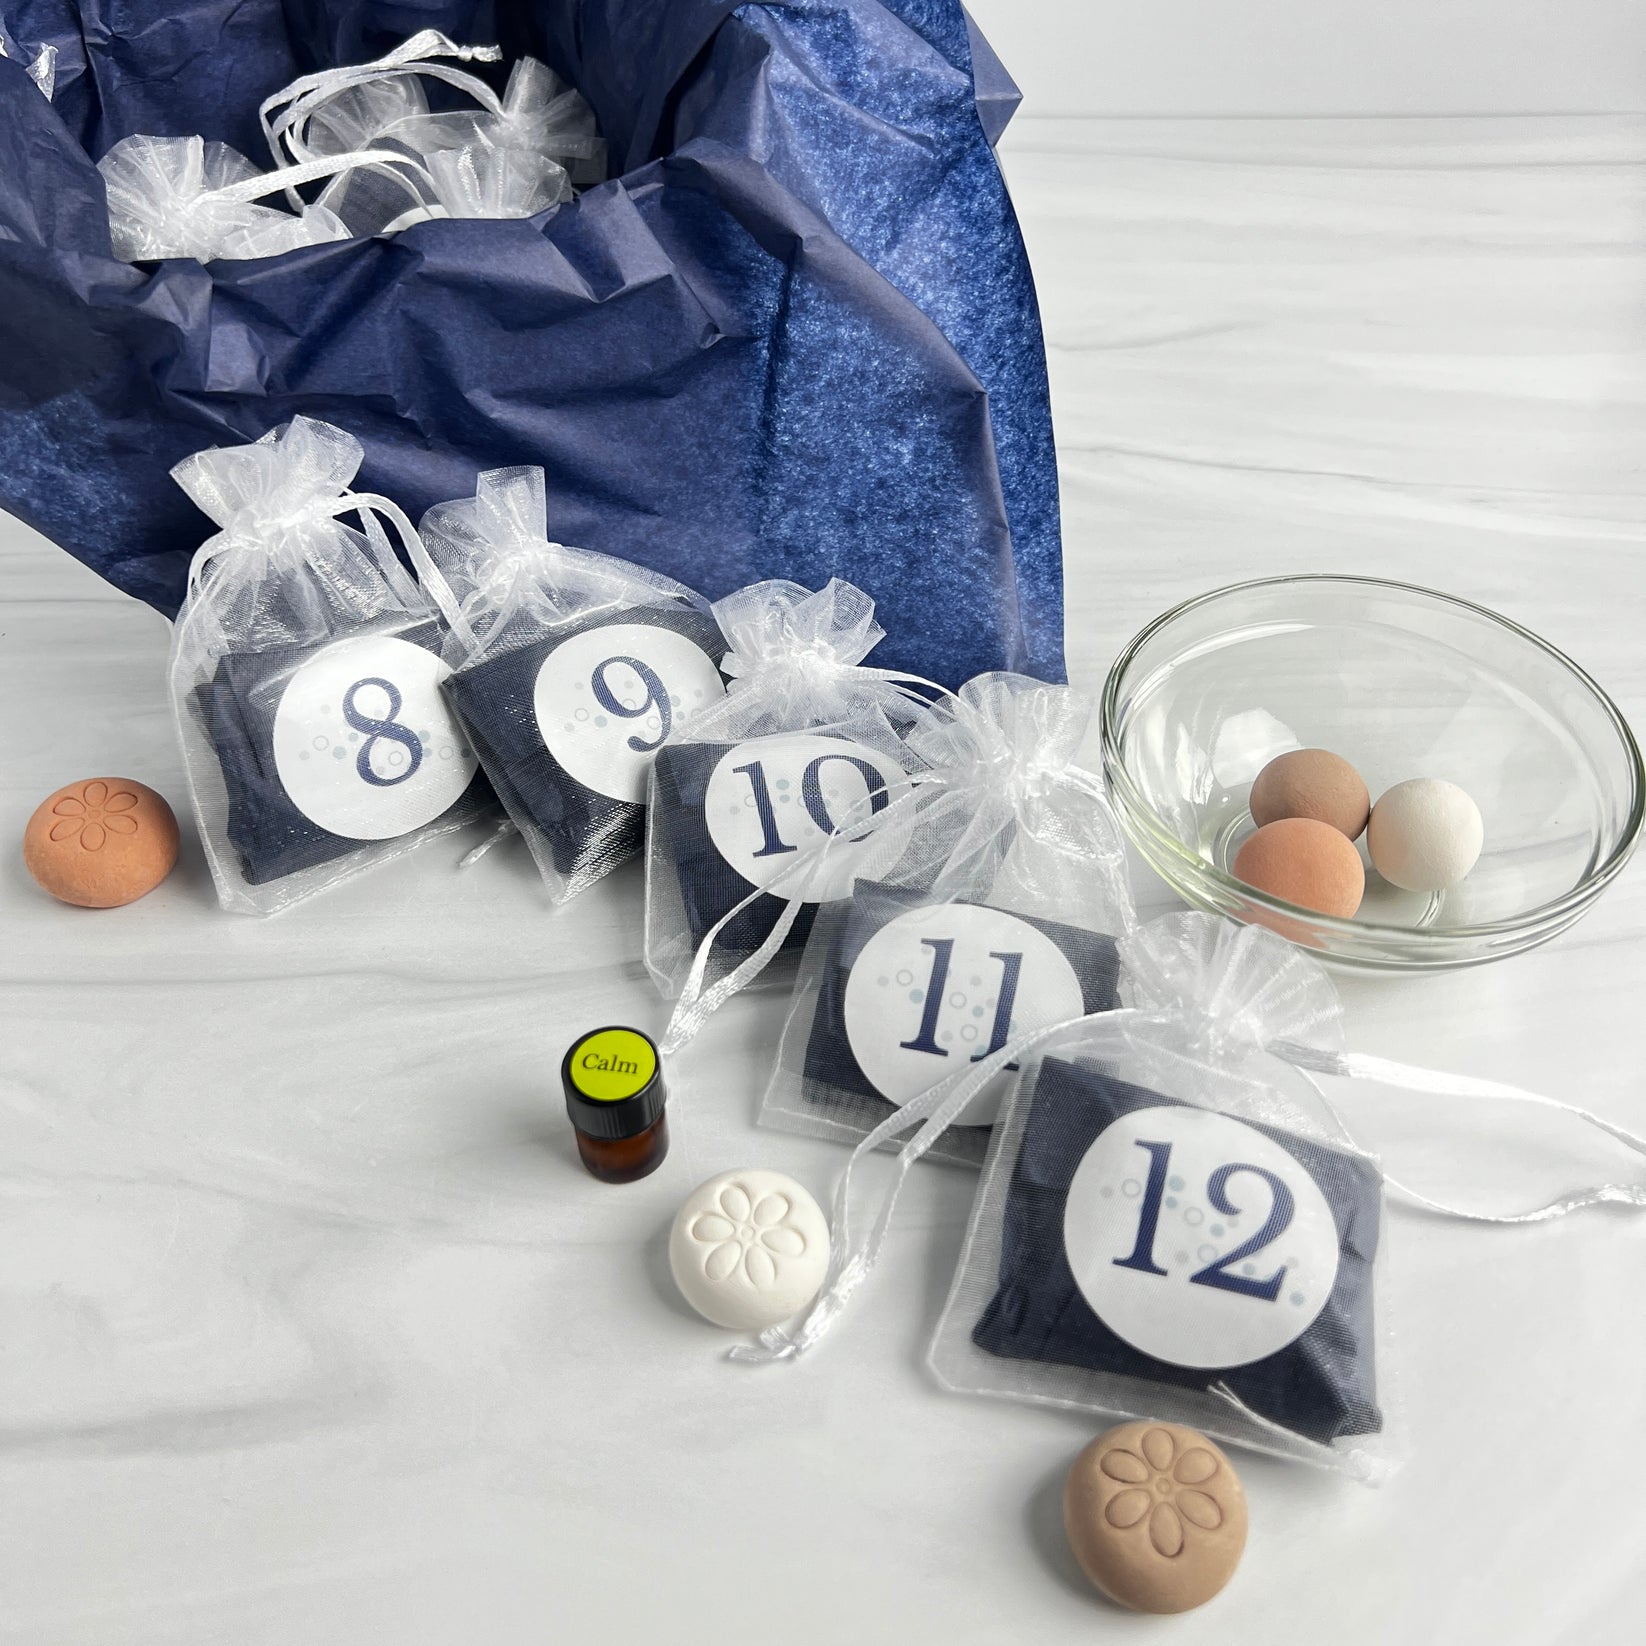 Aromatherapy Advent Calendar 12 or 24 Day BloomingLightVT